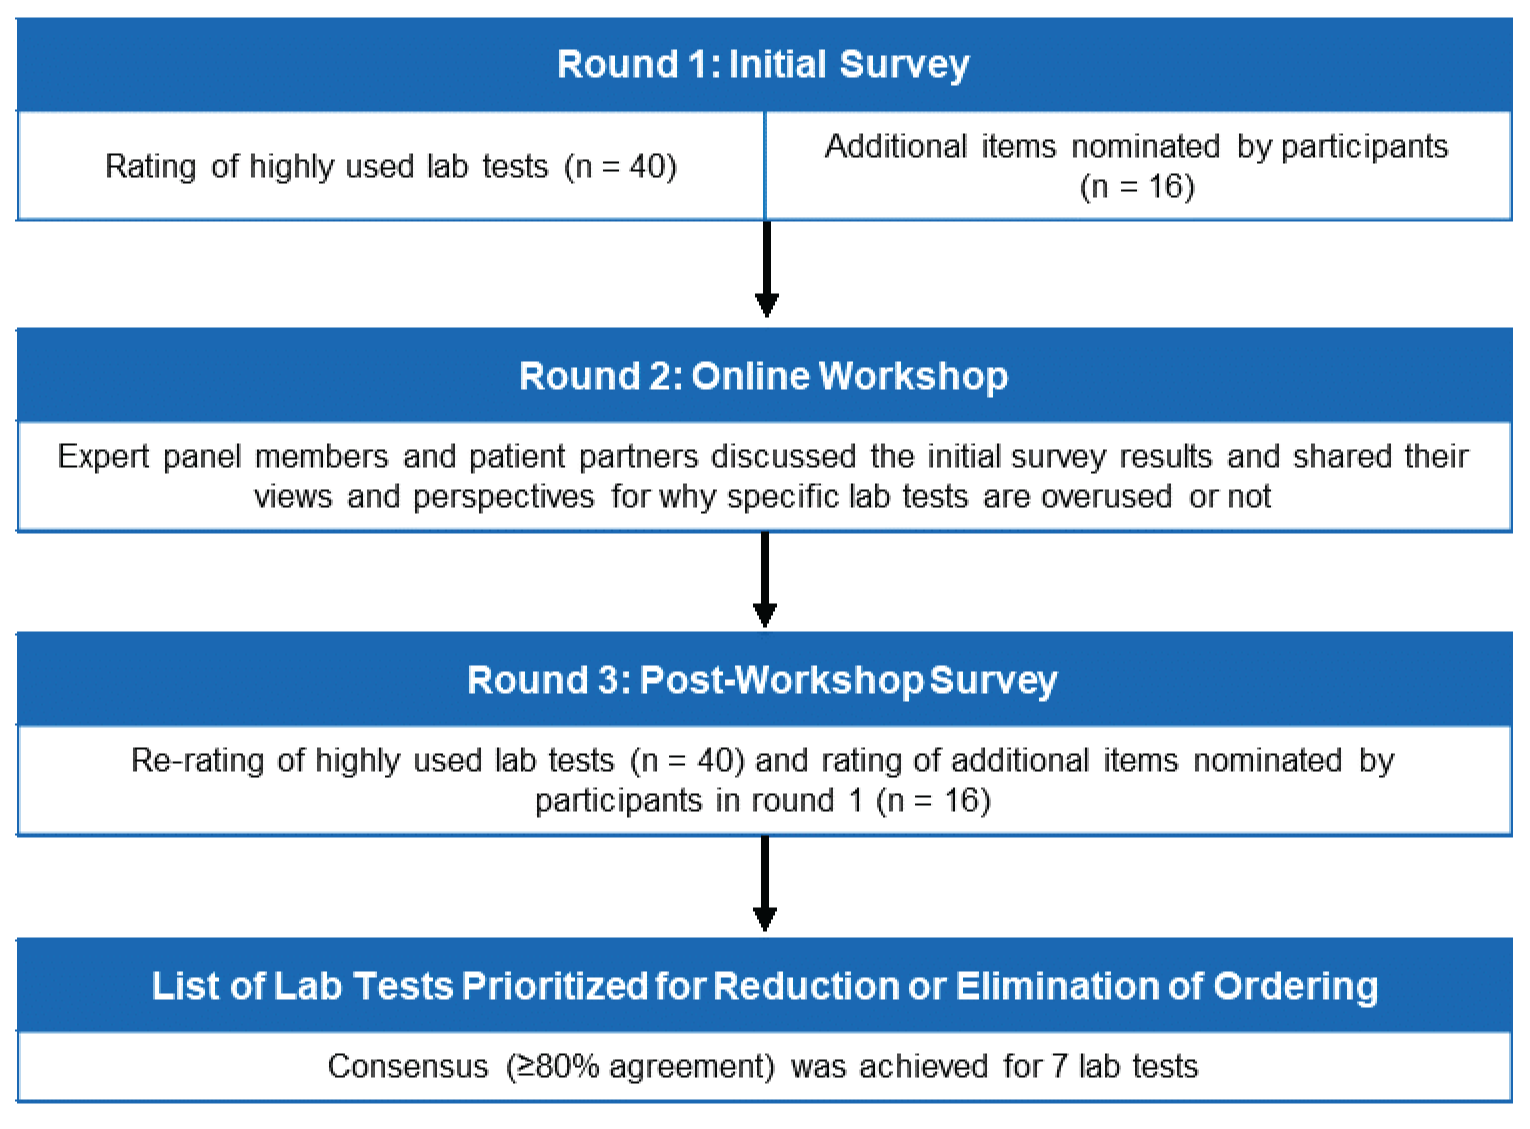 During round 1, participants voted on 40 highly used lab tests and nominated an additional 16 items for consideration in subsequent rounds. Round 2 was the online workshop where participants reviewed the round 1 survey results and discussed specific lab tests in detail. During round 3, participants rated 56 lab tests using the post-workshop survey, where 7 lab tests were prioritized for inclusion in the final list of lab tests for reduction or elimination of ordering.